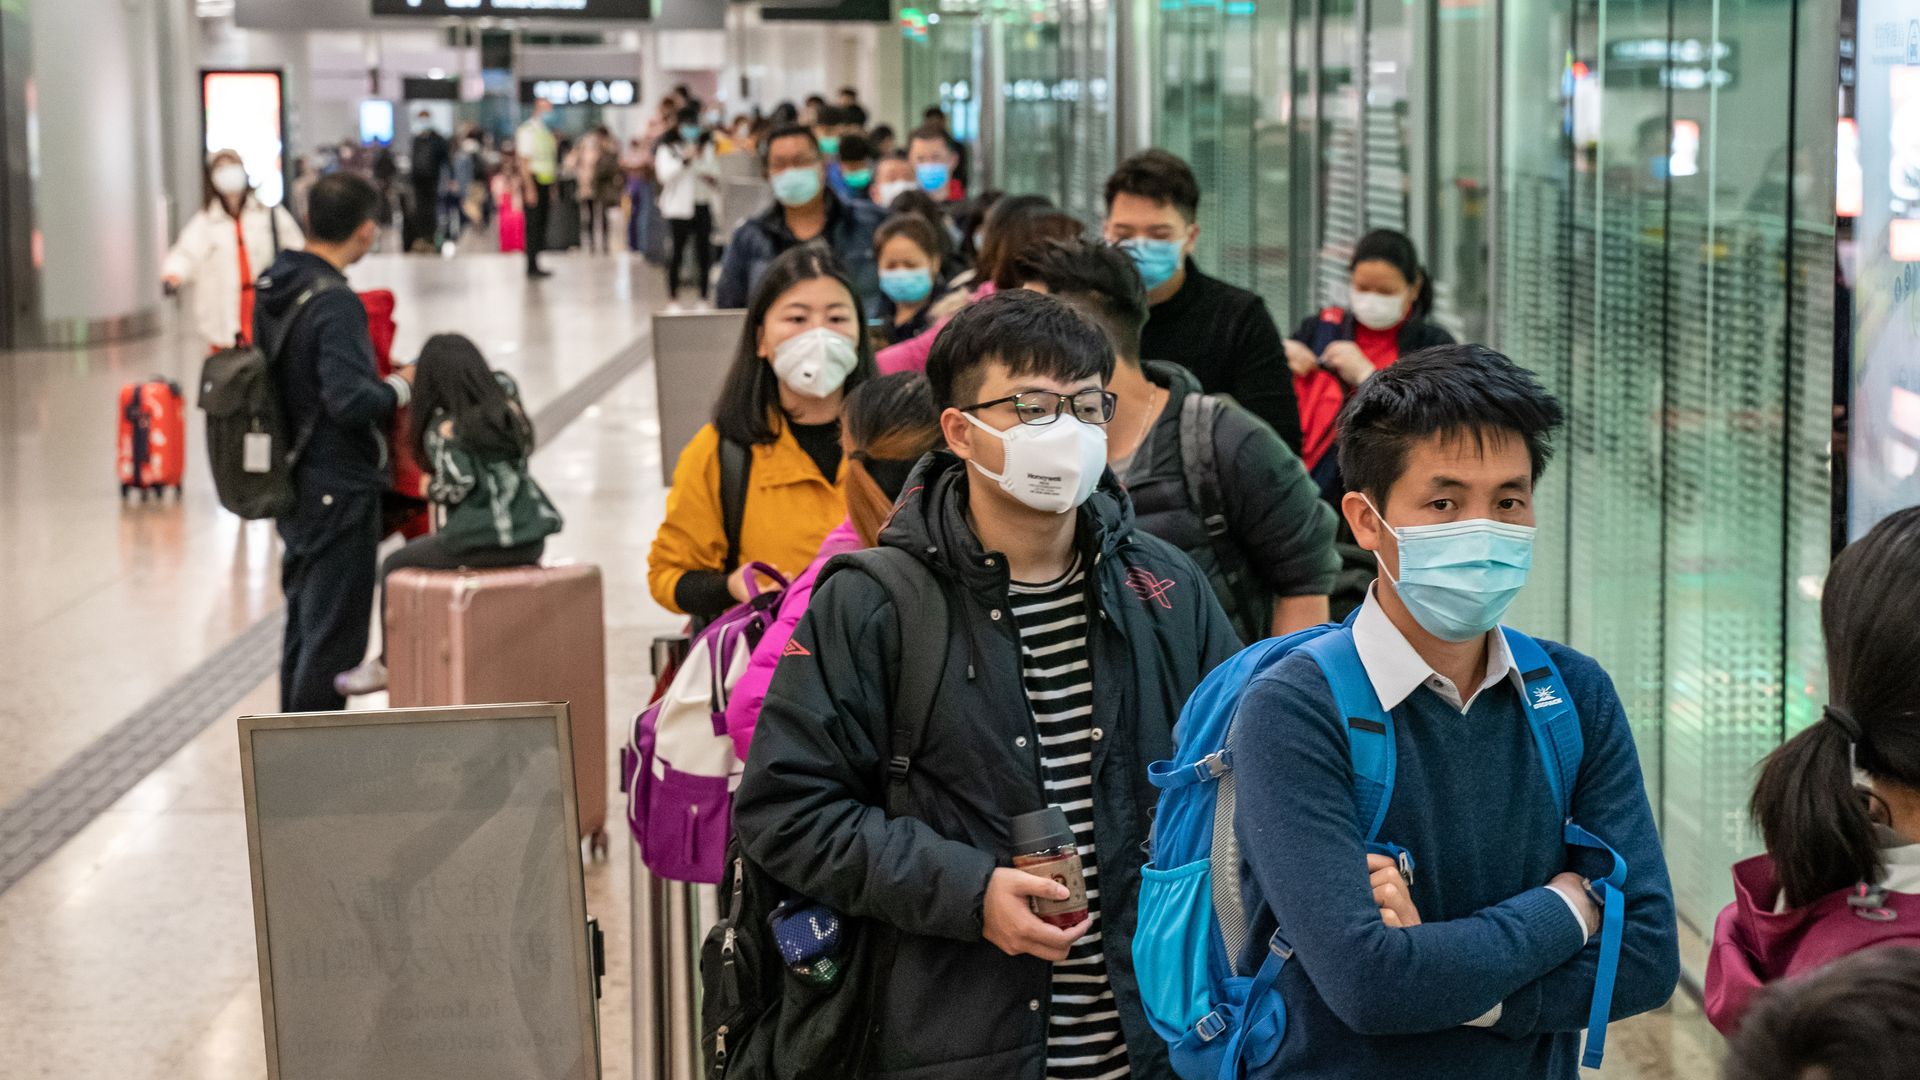 In this image, a line of people wearing face masks to protect against the coronavirus stand in line.